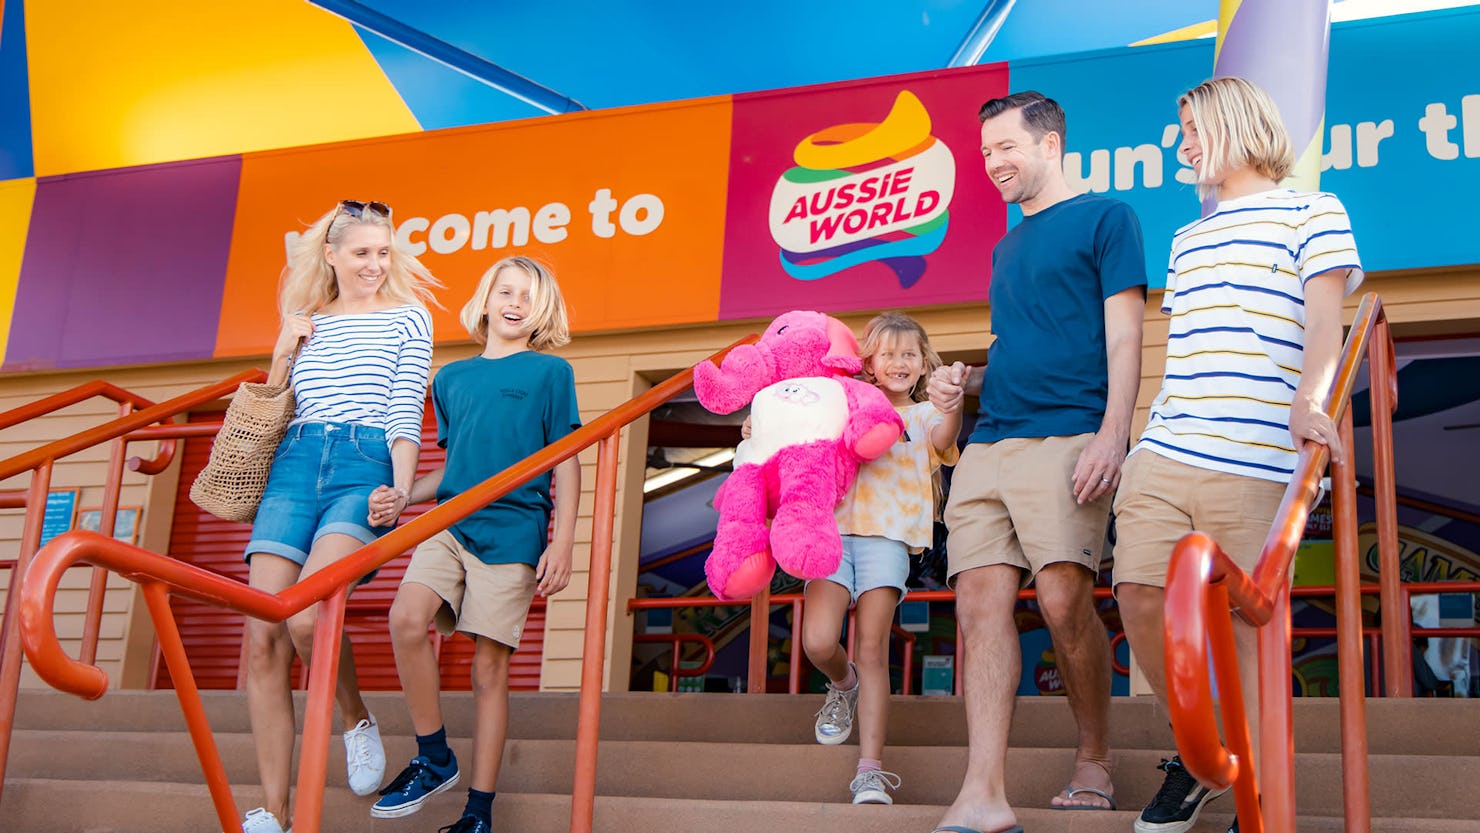 From toddlers to teens, there's something for everyone at Aussie World